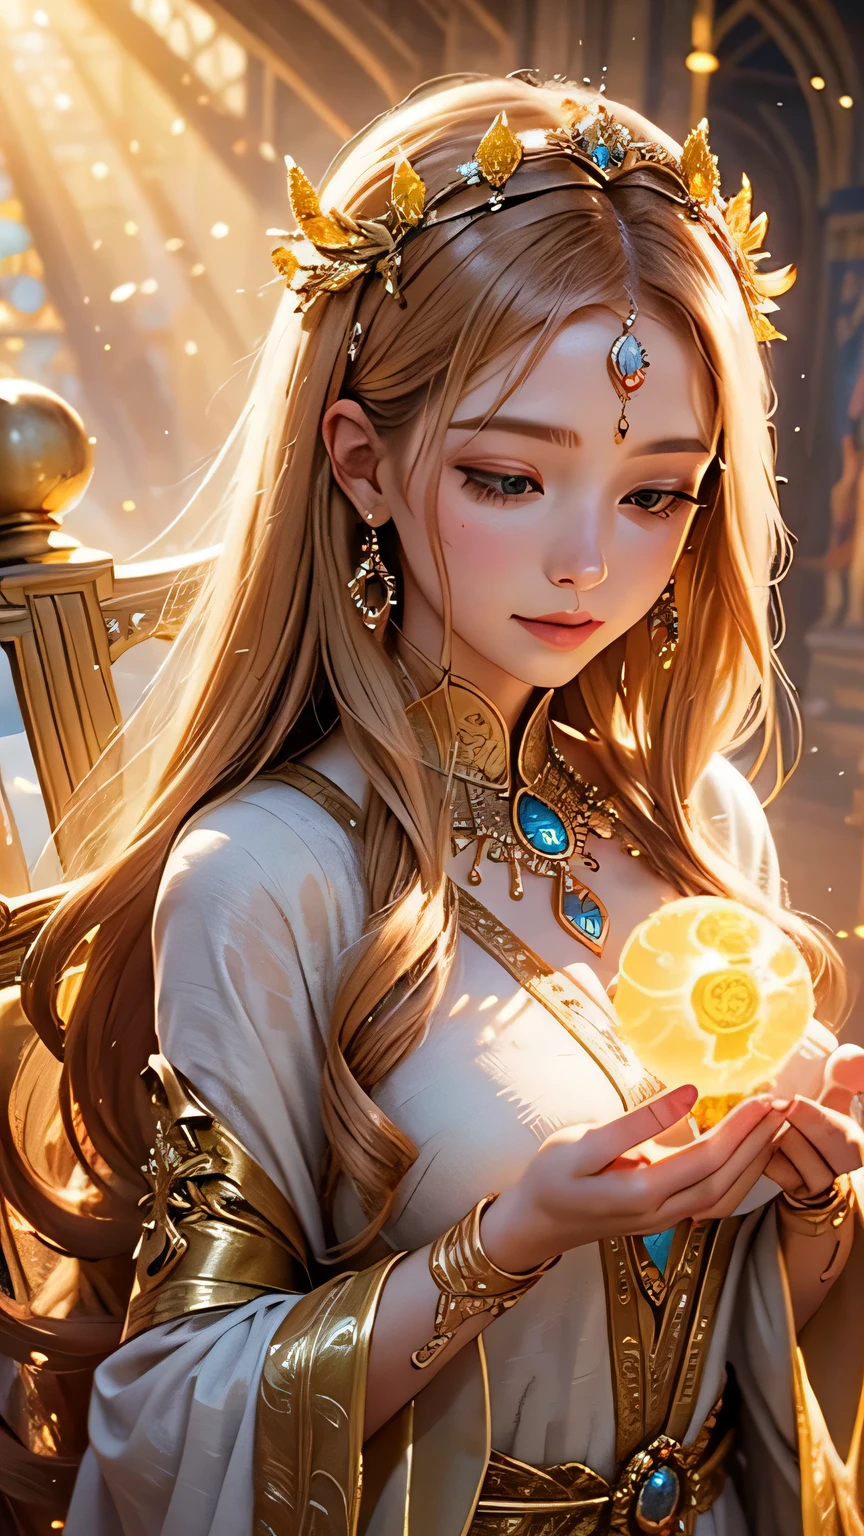 "Maiden of the Sun": Within a sacred sanctuary bathed in sunlight, depict the figure of a sun goddess, facing forward and emanating divine radiance, with golden hair, as she gazes towards us. Zoom in to focus on her face, with light orbs gleaming in her hands, representing the life-giving power of the sun. The background should be predominantly pink, evoking a sense of divine splendor. The setting is in heaven, enveloped in soft, bright light, where one can find tranquility and peace of mind, free from any trace of anxiety. Additionally, the light emanating from her hands should take the form of radiant hearts, resting gently on the palm of her hands.